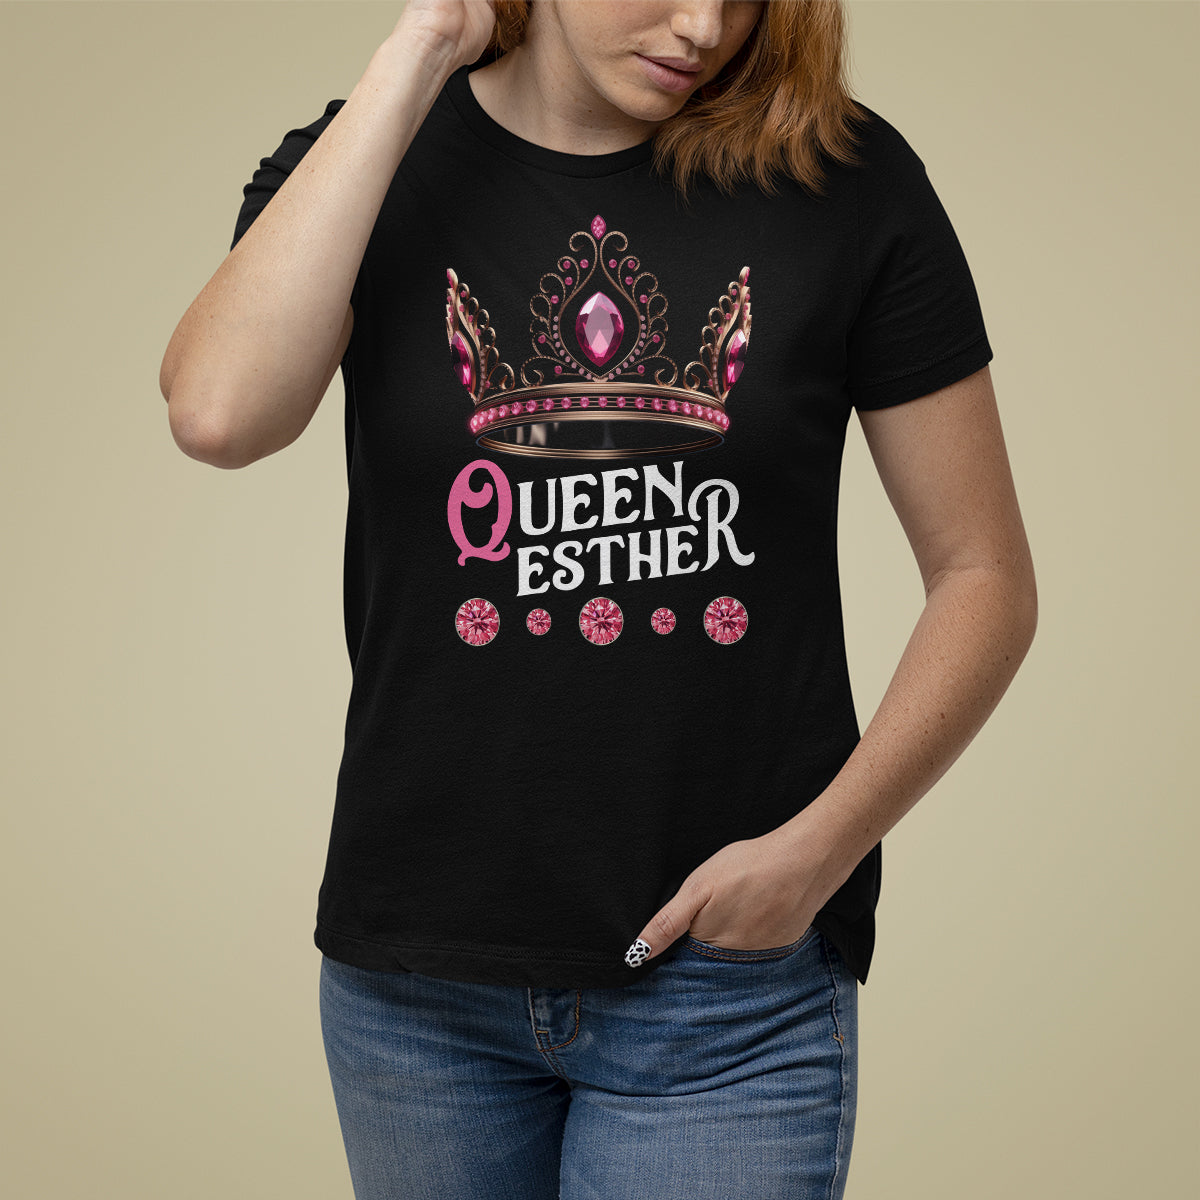 Purim Holiday T Shirt For Women Queen Esther Jewish Israel Feast